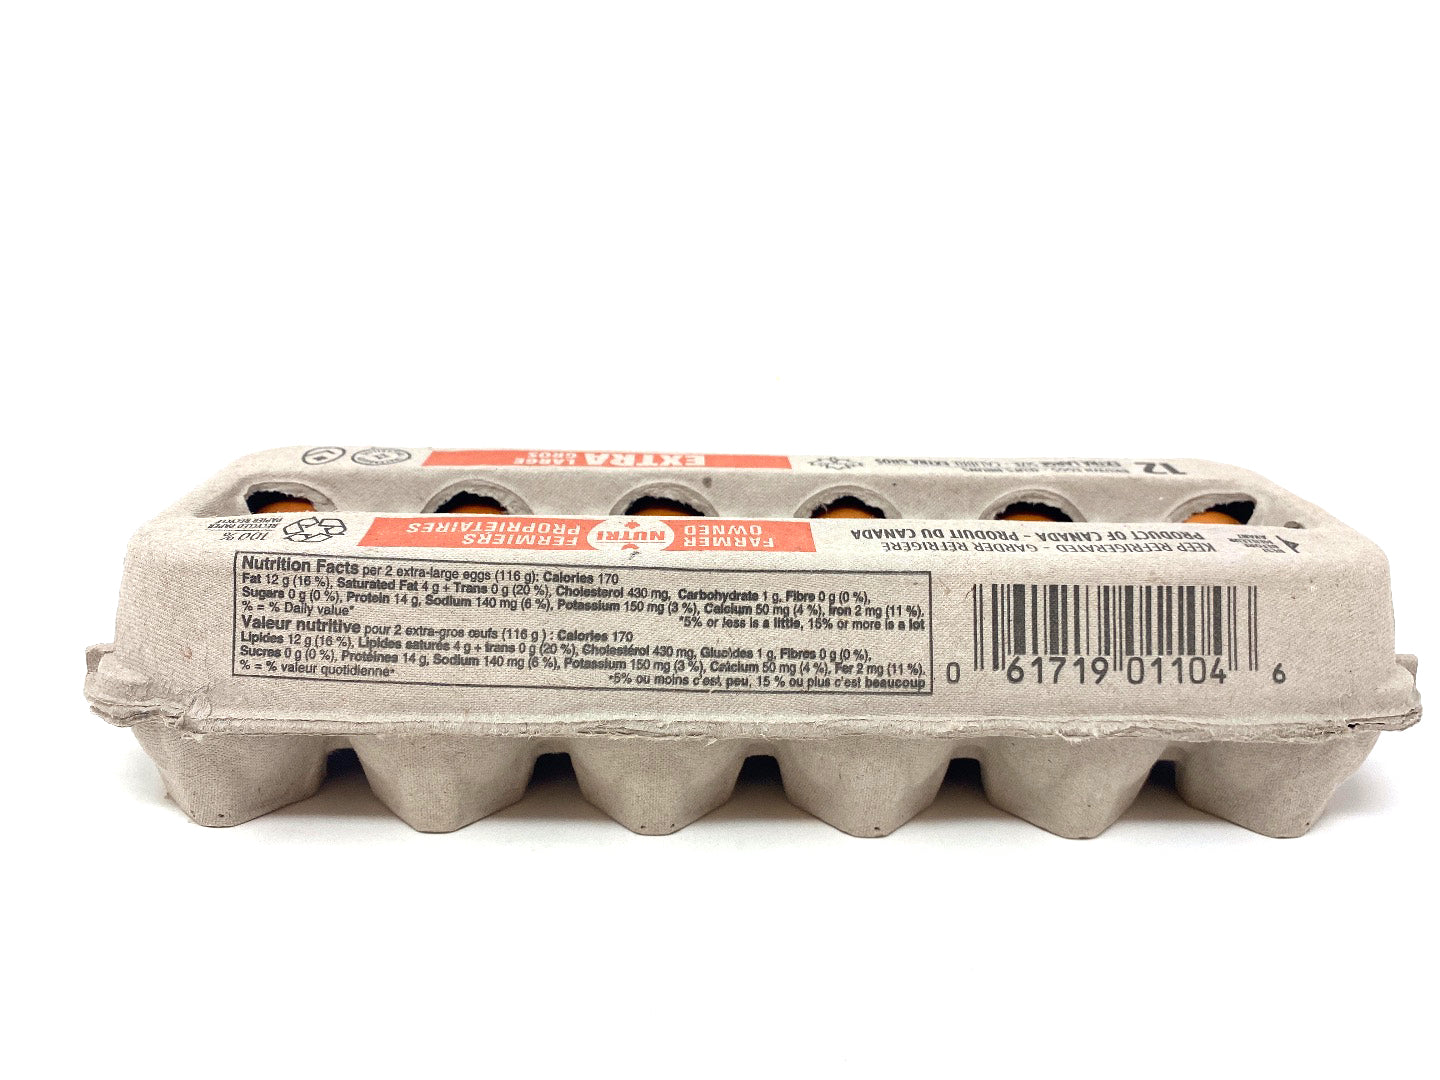 Nutri Brown Eggs (Extra Large)